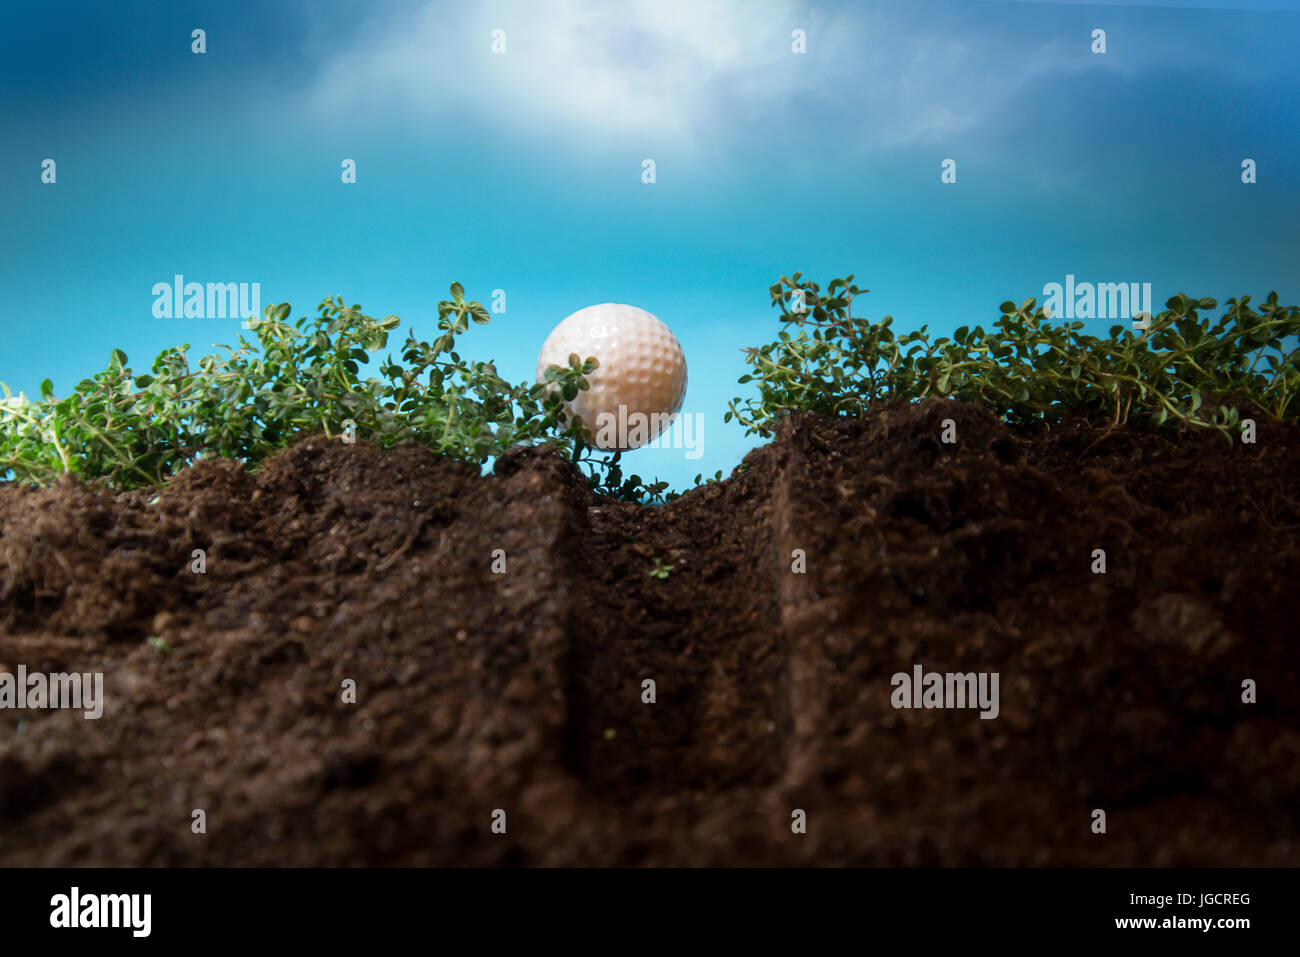 Close-up of a golf ball on a golf tee Stock Photo